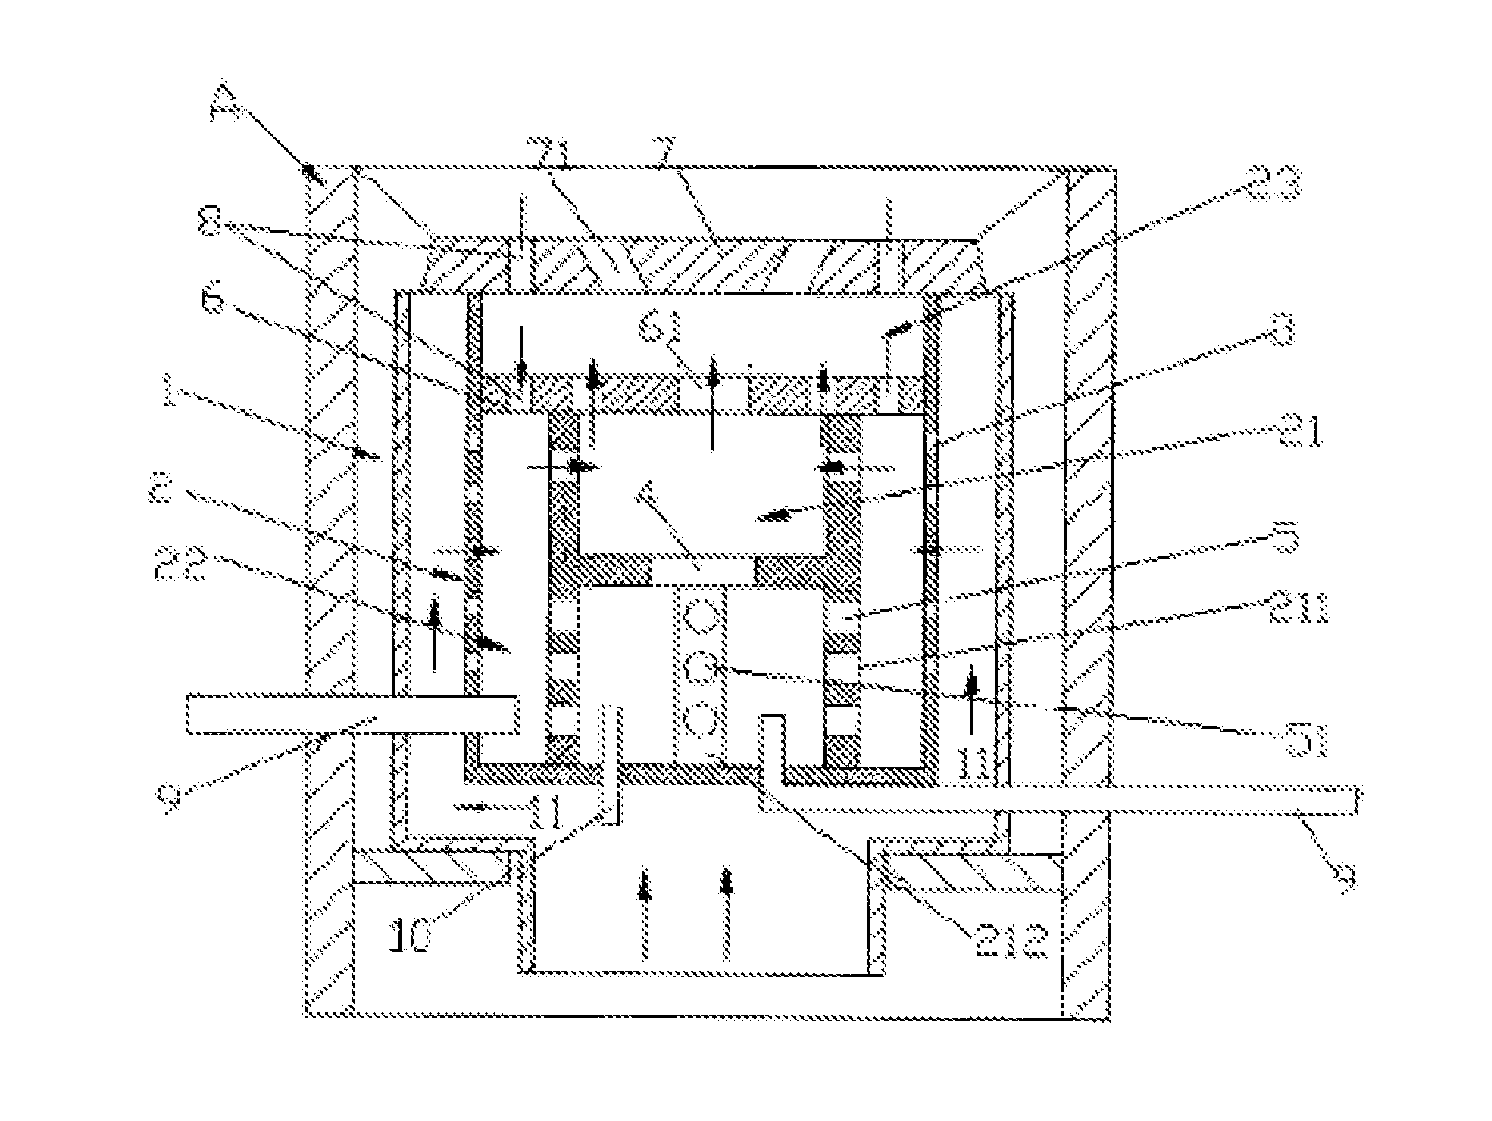 Athermal radiation type oil burner and a method for reducing greenhouse gas emissions